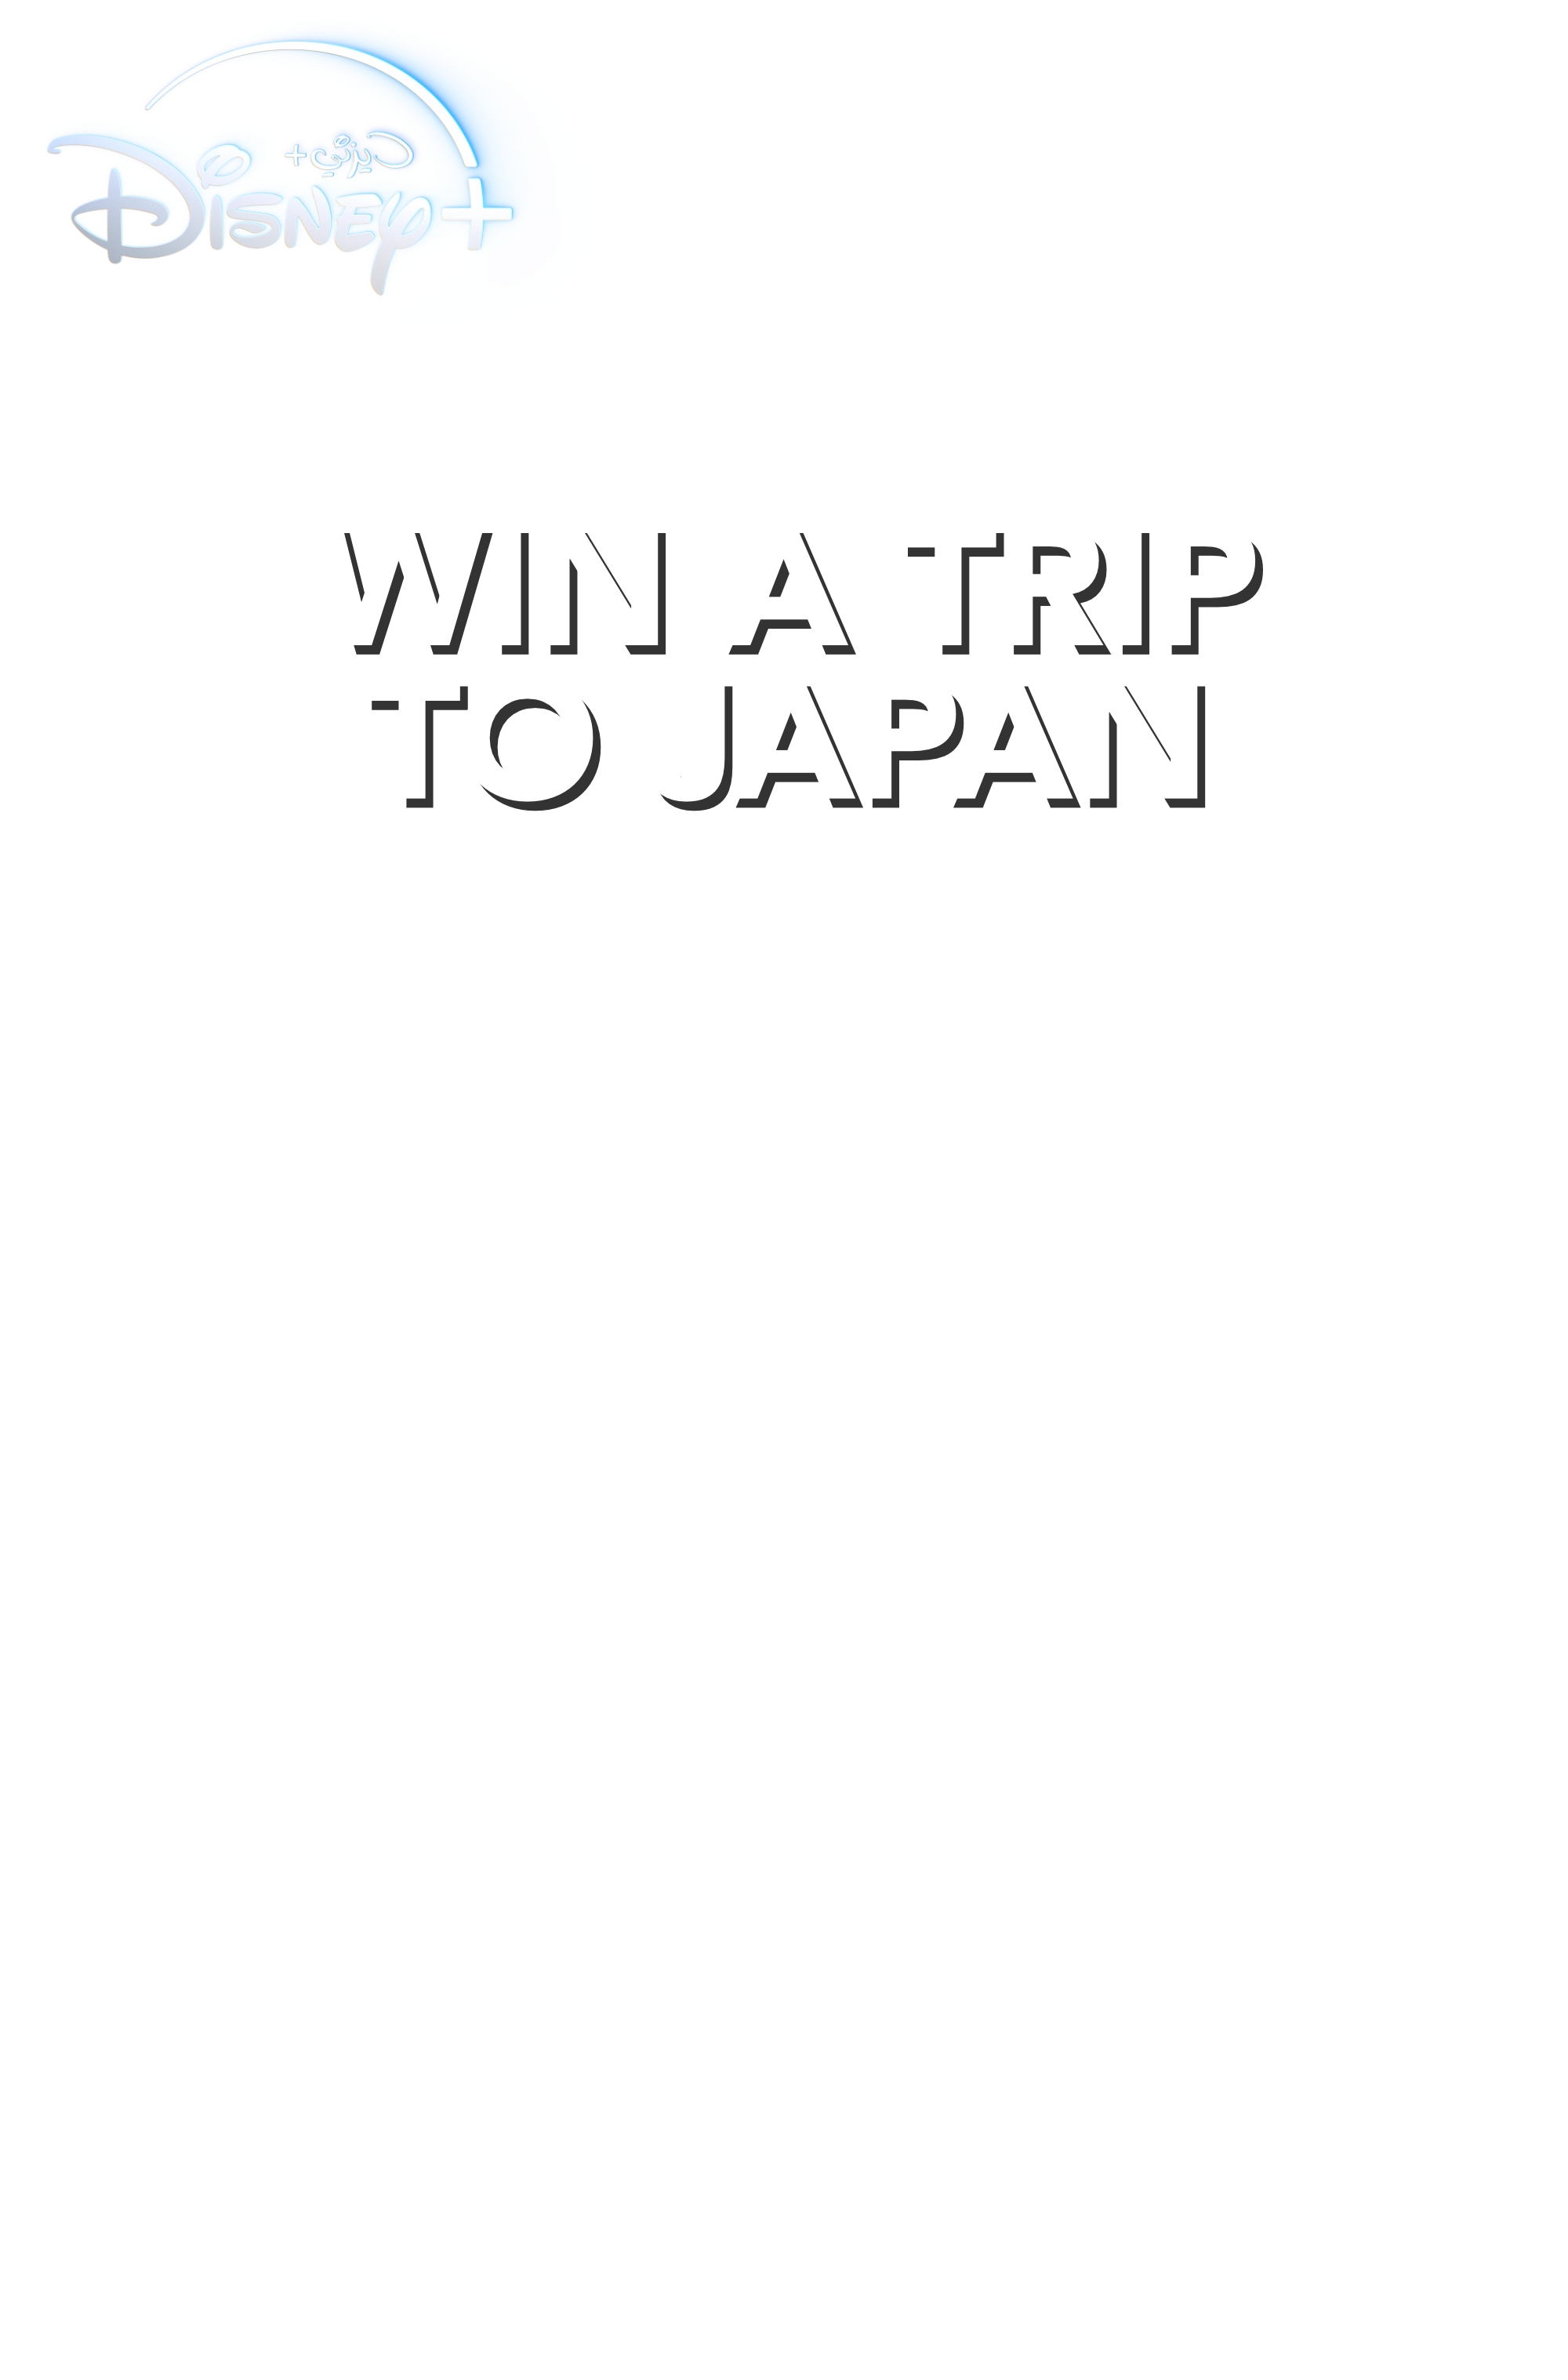 Win an Inspired Trip to Japan